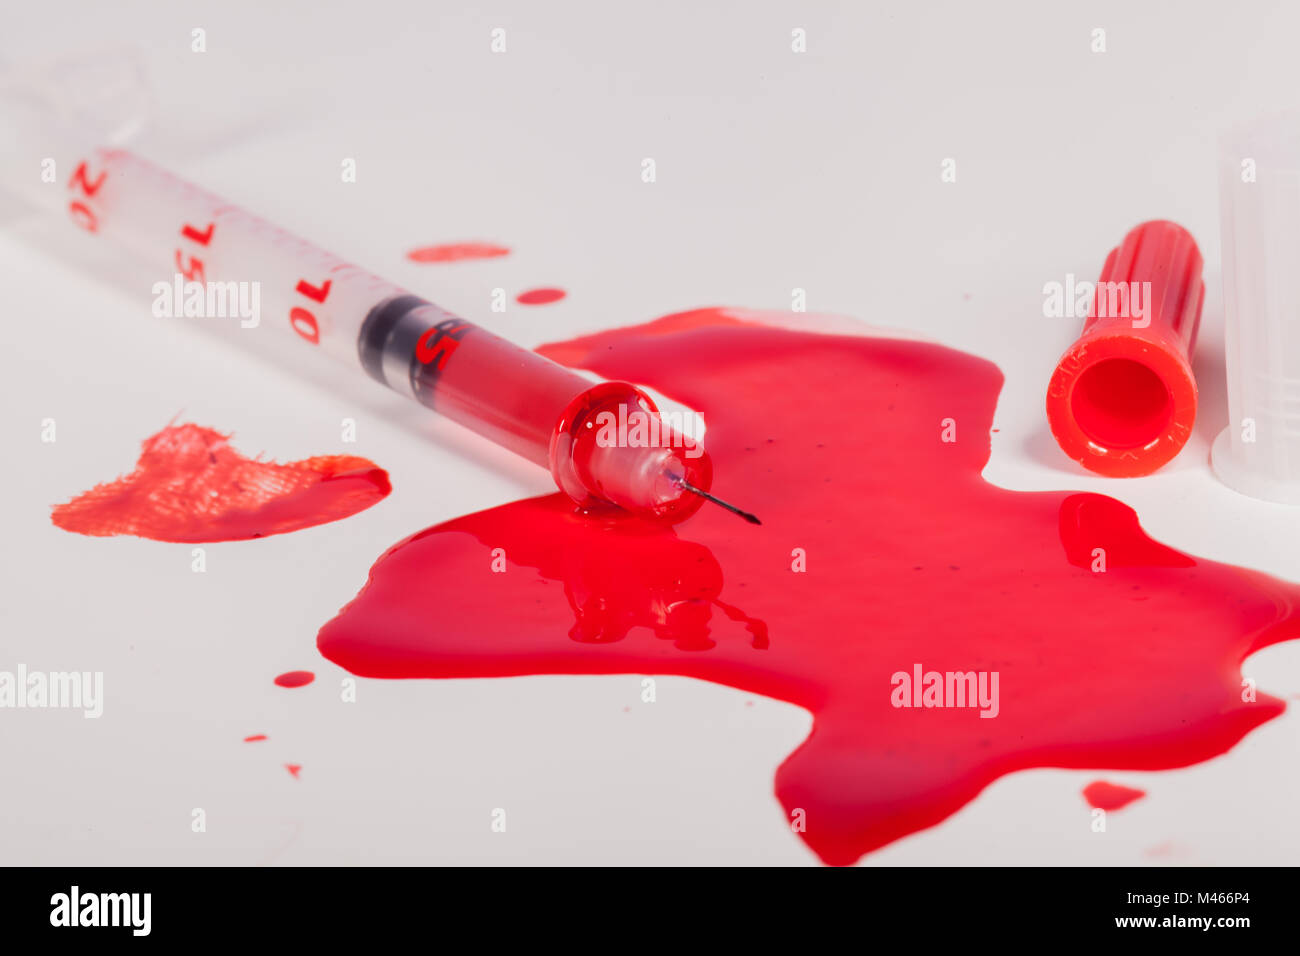 Syringe Squirting Red Blood onto White Background Stock Photo